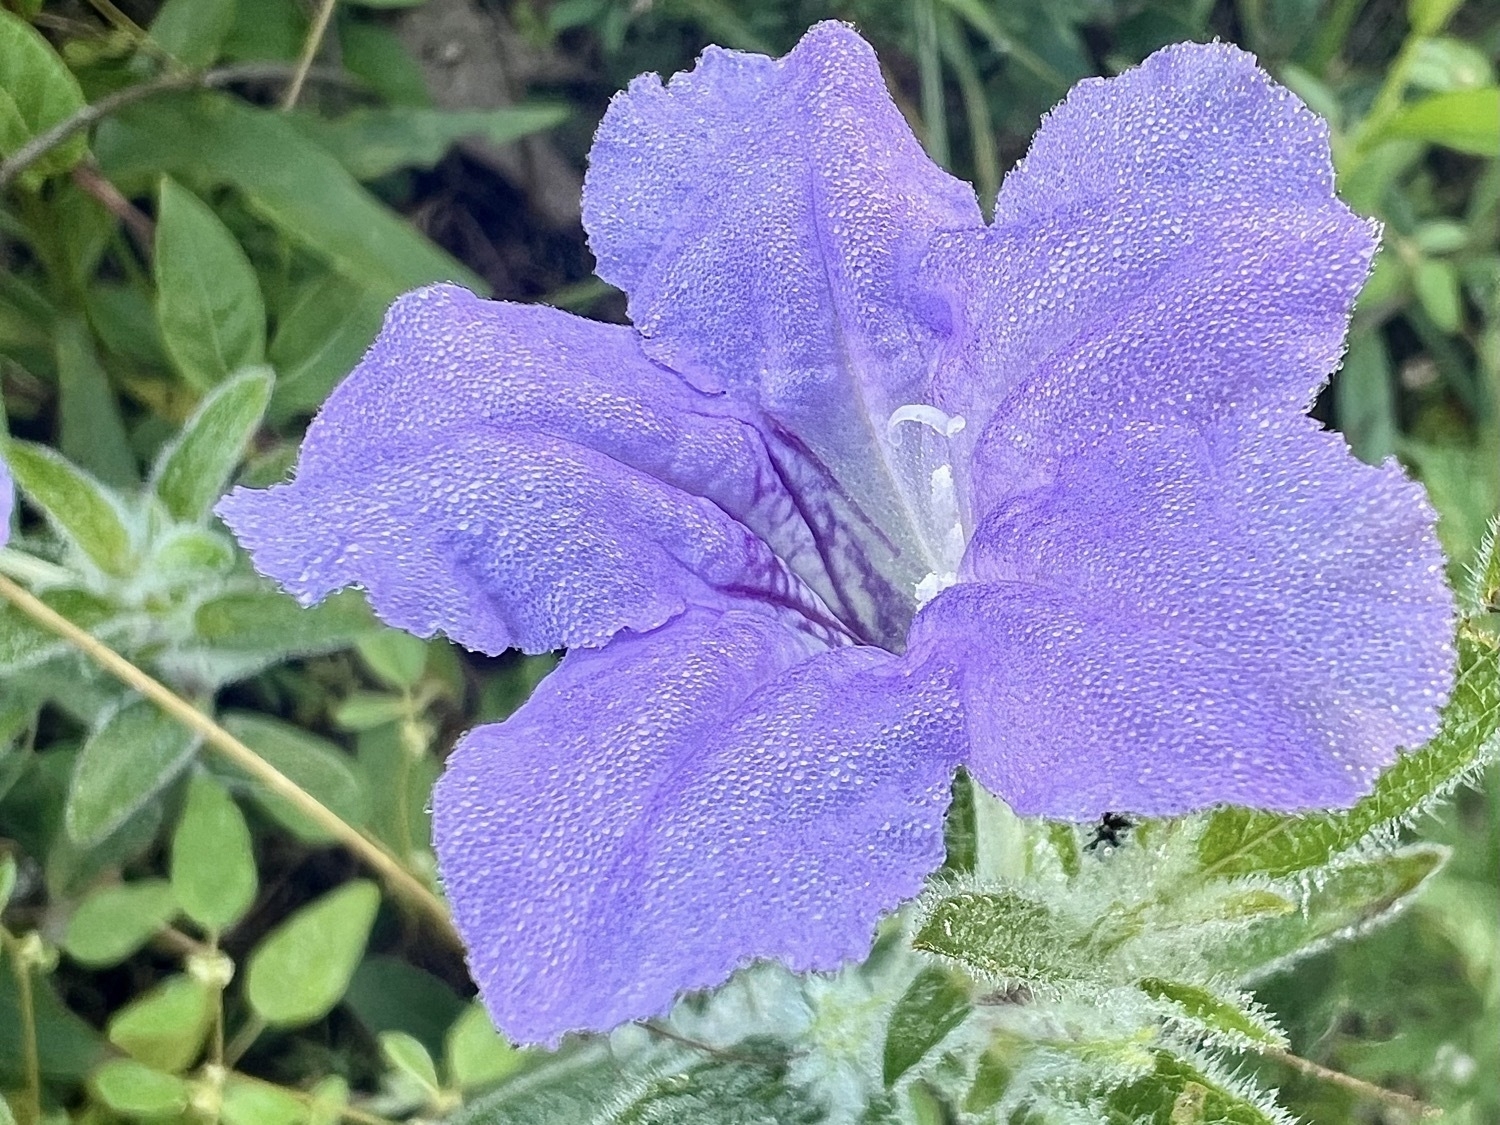 A pale purple flower with five large rounded petals. The center of the flower is white with darker purple lines. The flower is covered in dew droplets